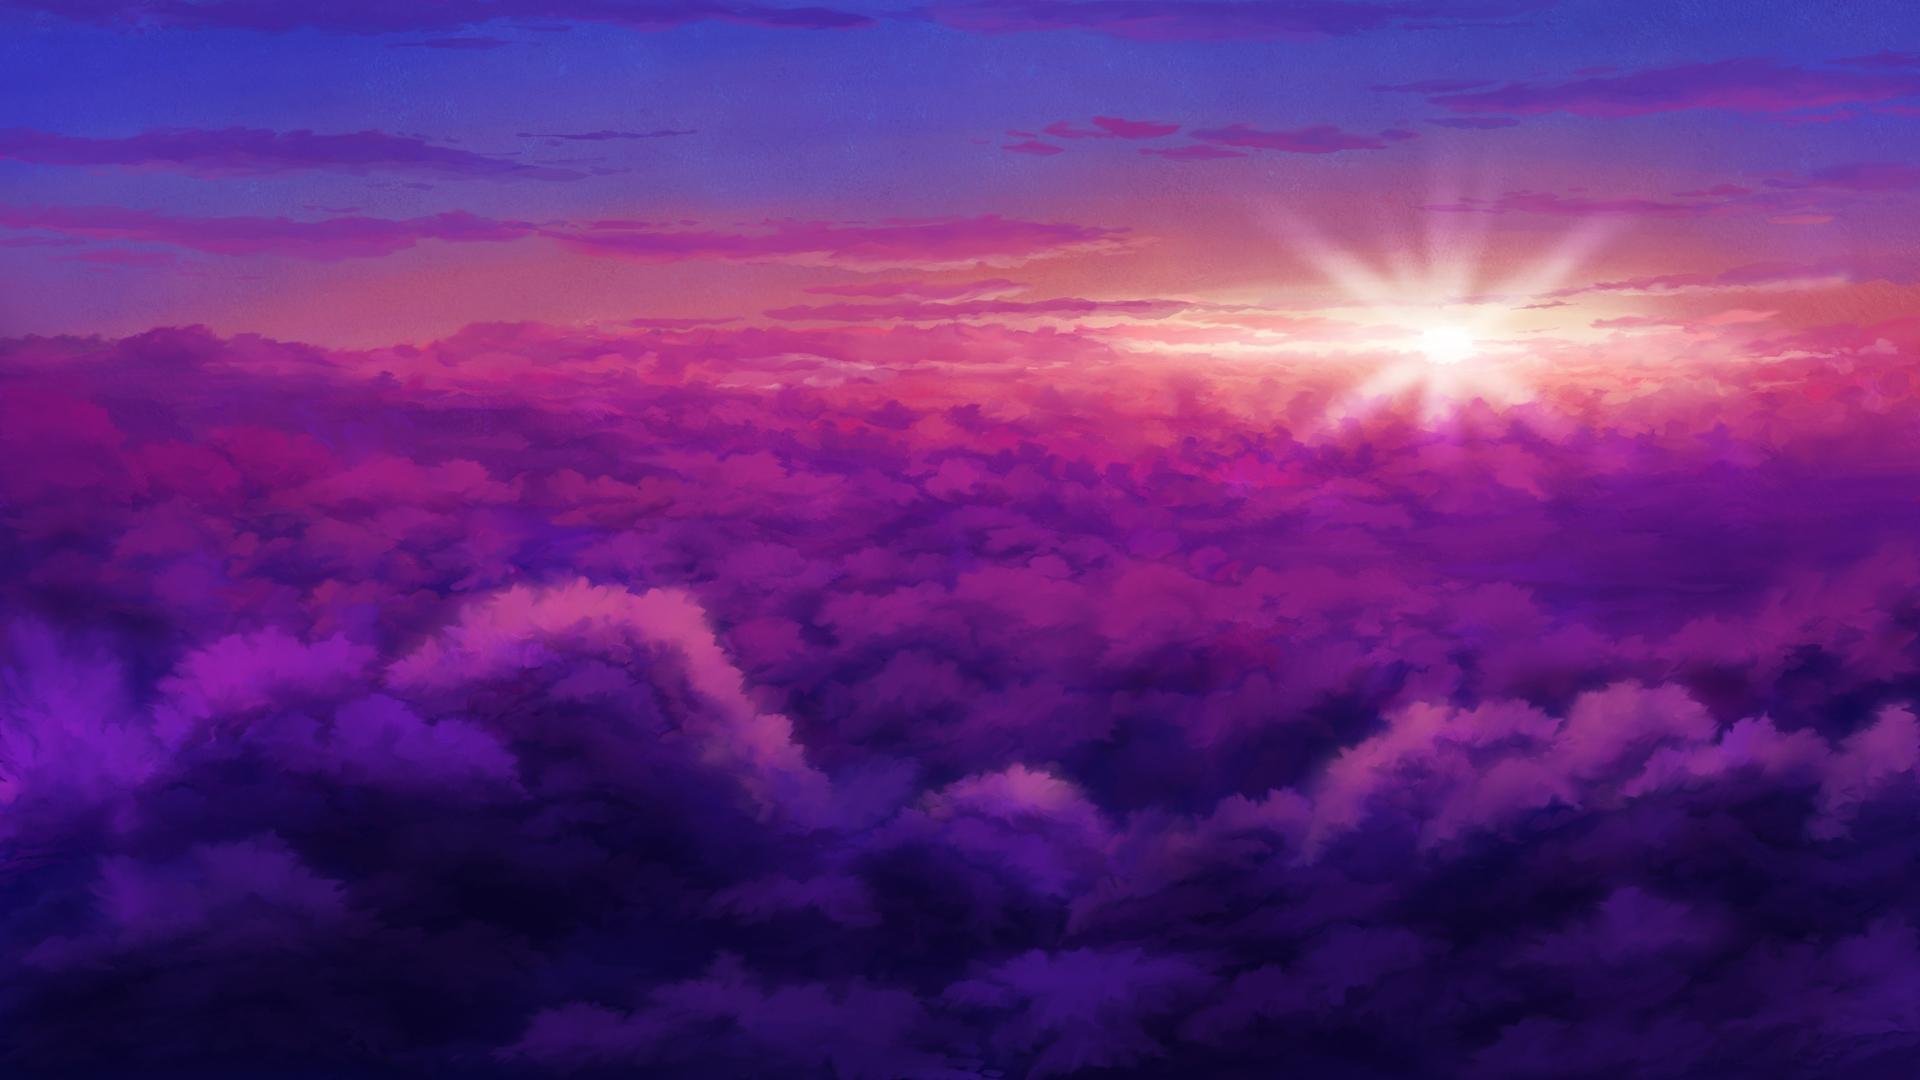 Download 1920x1080 Anime Landscape, Clouds, Sunset Wallpaper for Widescreen